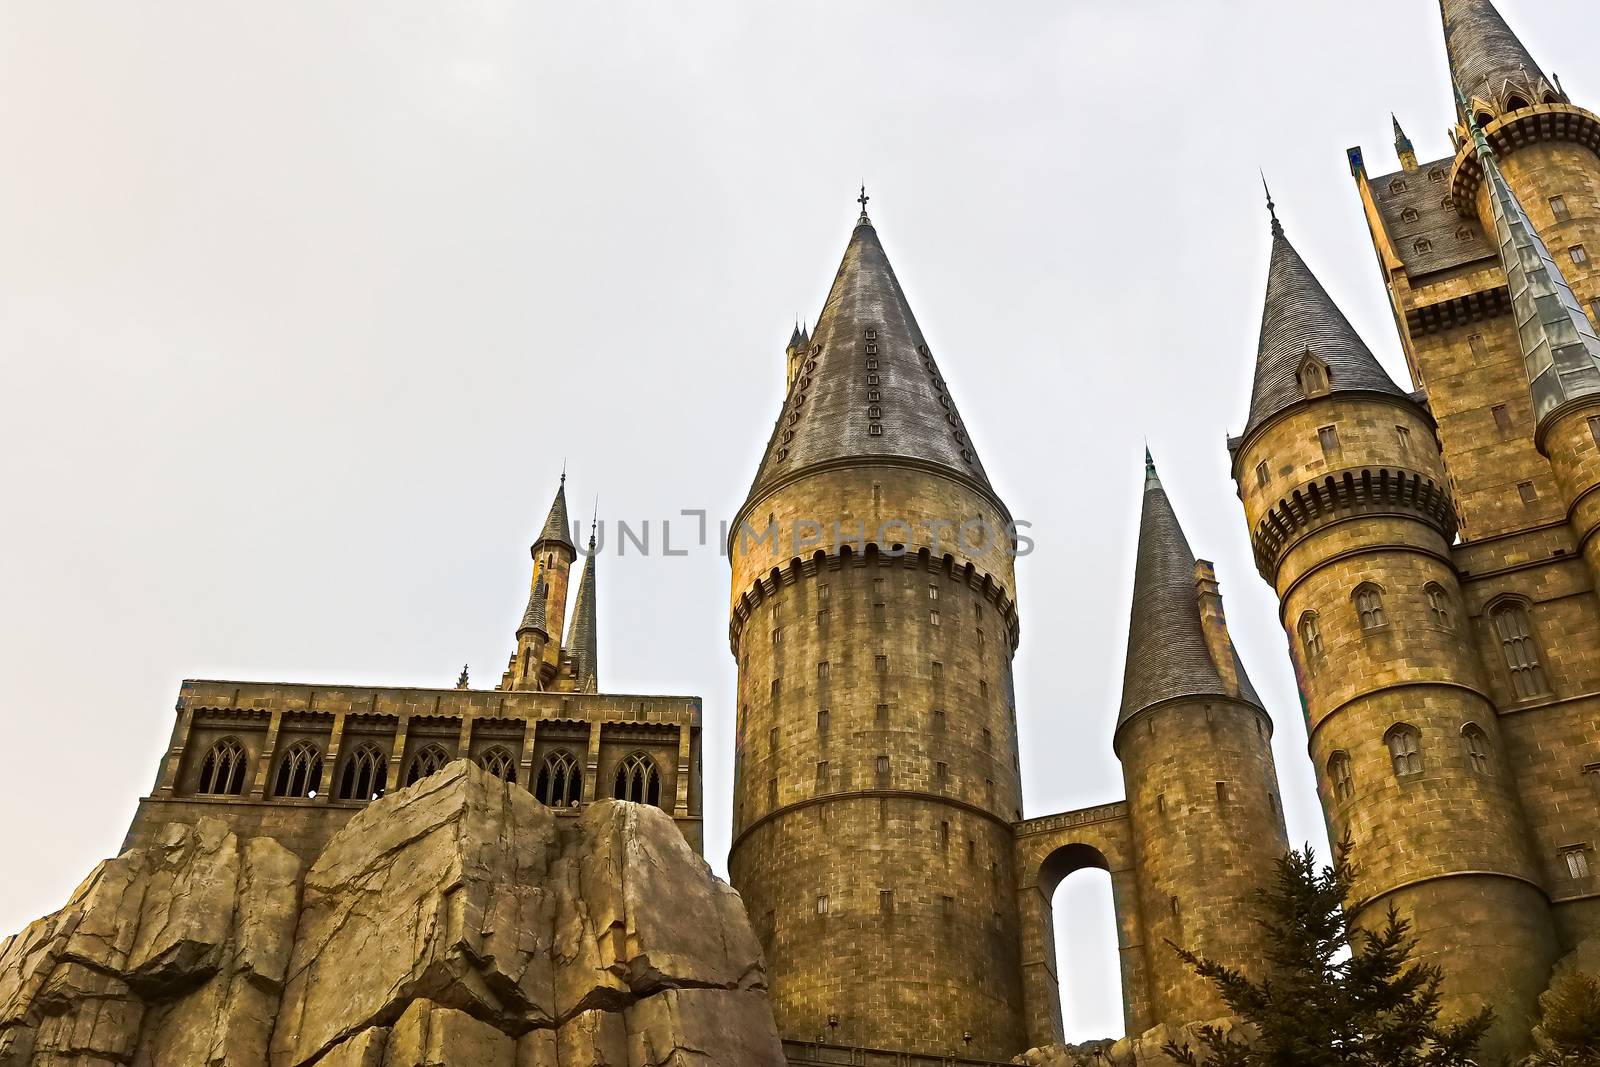 Osaka, Japan - Dec 02, 2017: View of Hogwarts castle at the Wizarding World of Harry Potter in Universal Studios Japan.